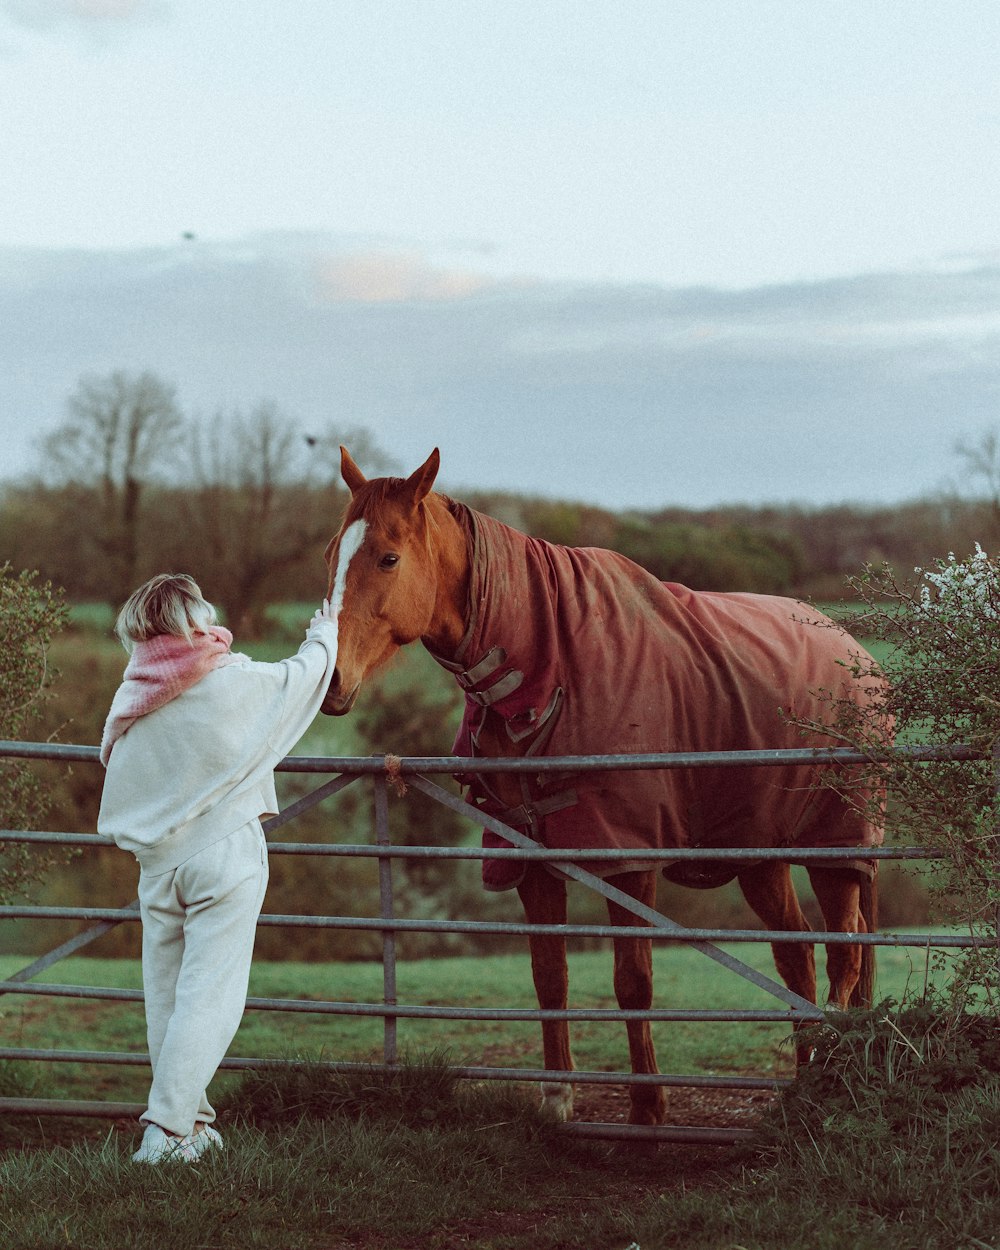 woman in white long sleeve shirt standing beside brown horse during daytime